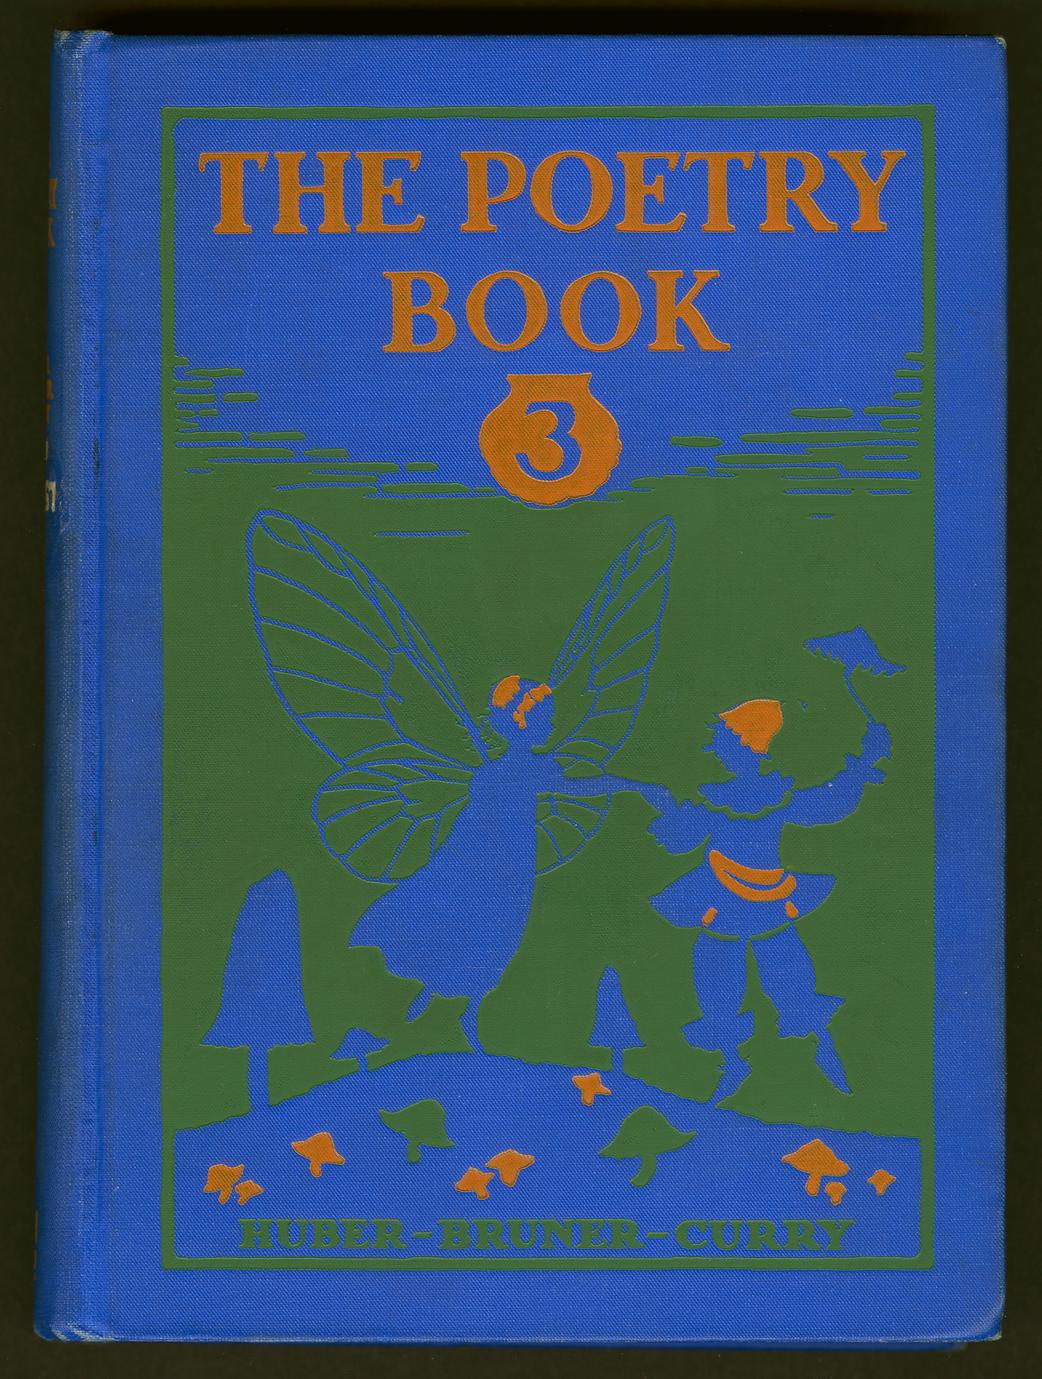 The poetry book (1 of 3)